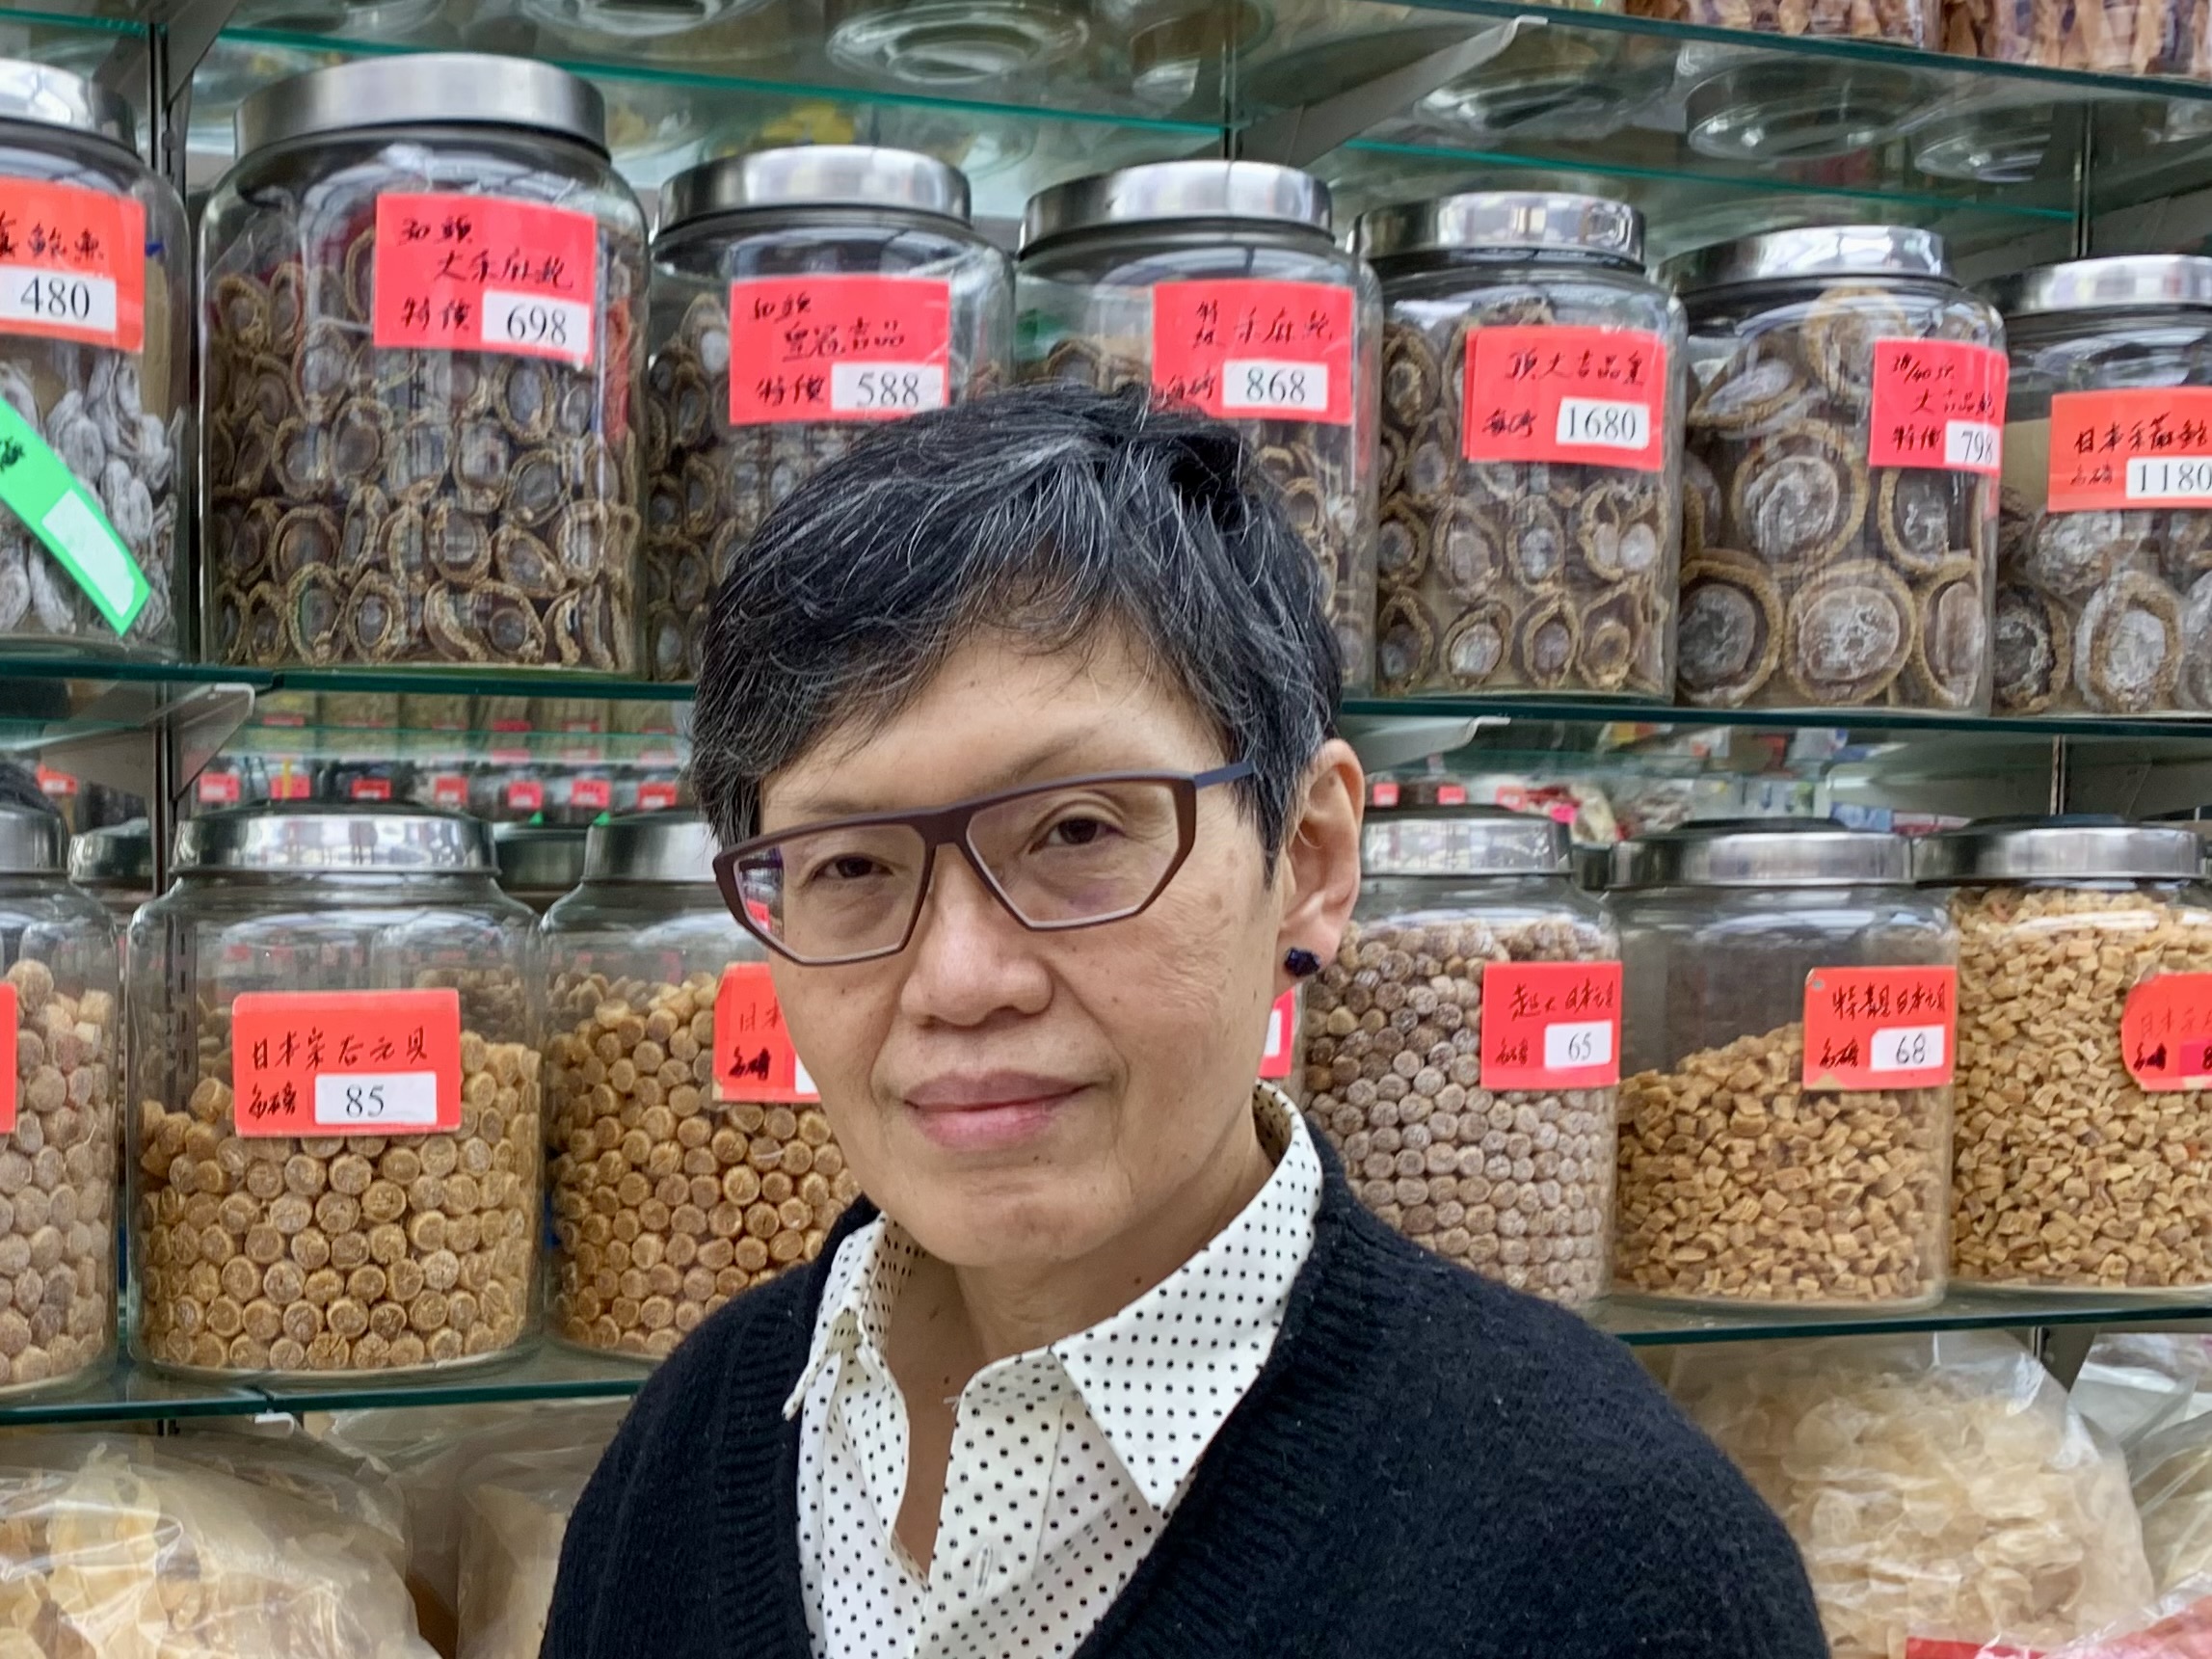 Lydia Kwa at a Chinese herbal shop on East Pender Street in Vancouver's Chinatown
(photo by Joshua Paul)